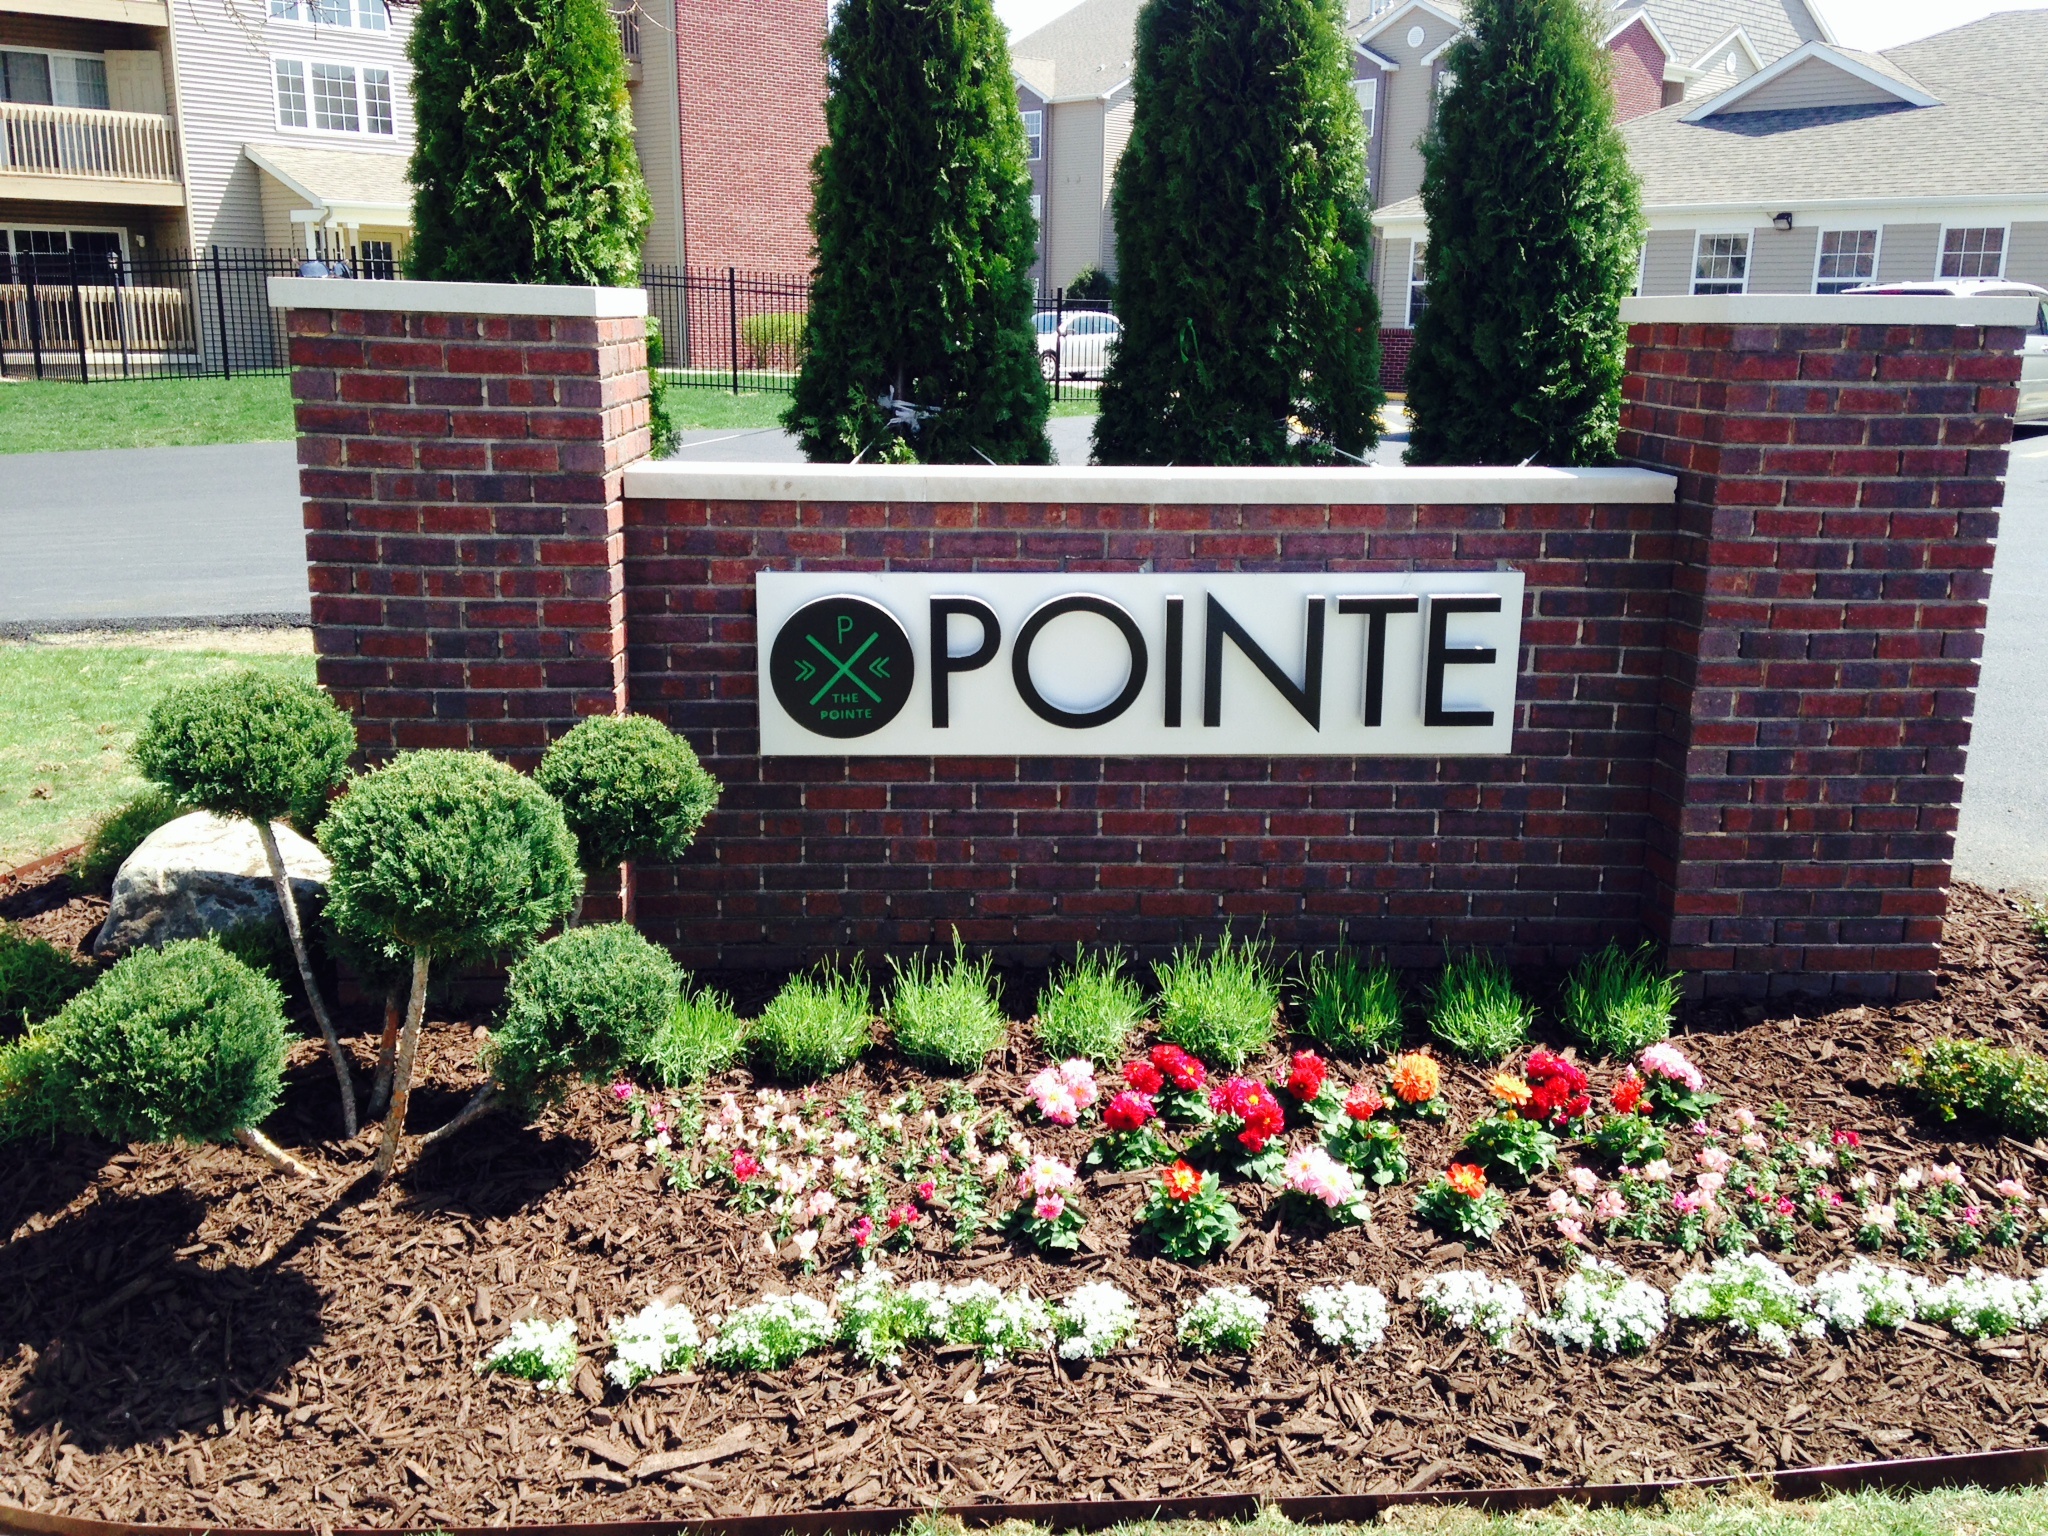 The Pointe Love Their New Monument Signs